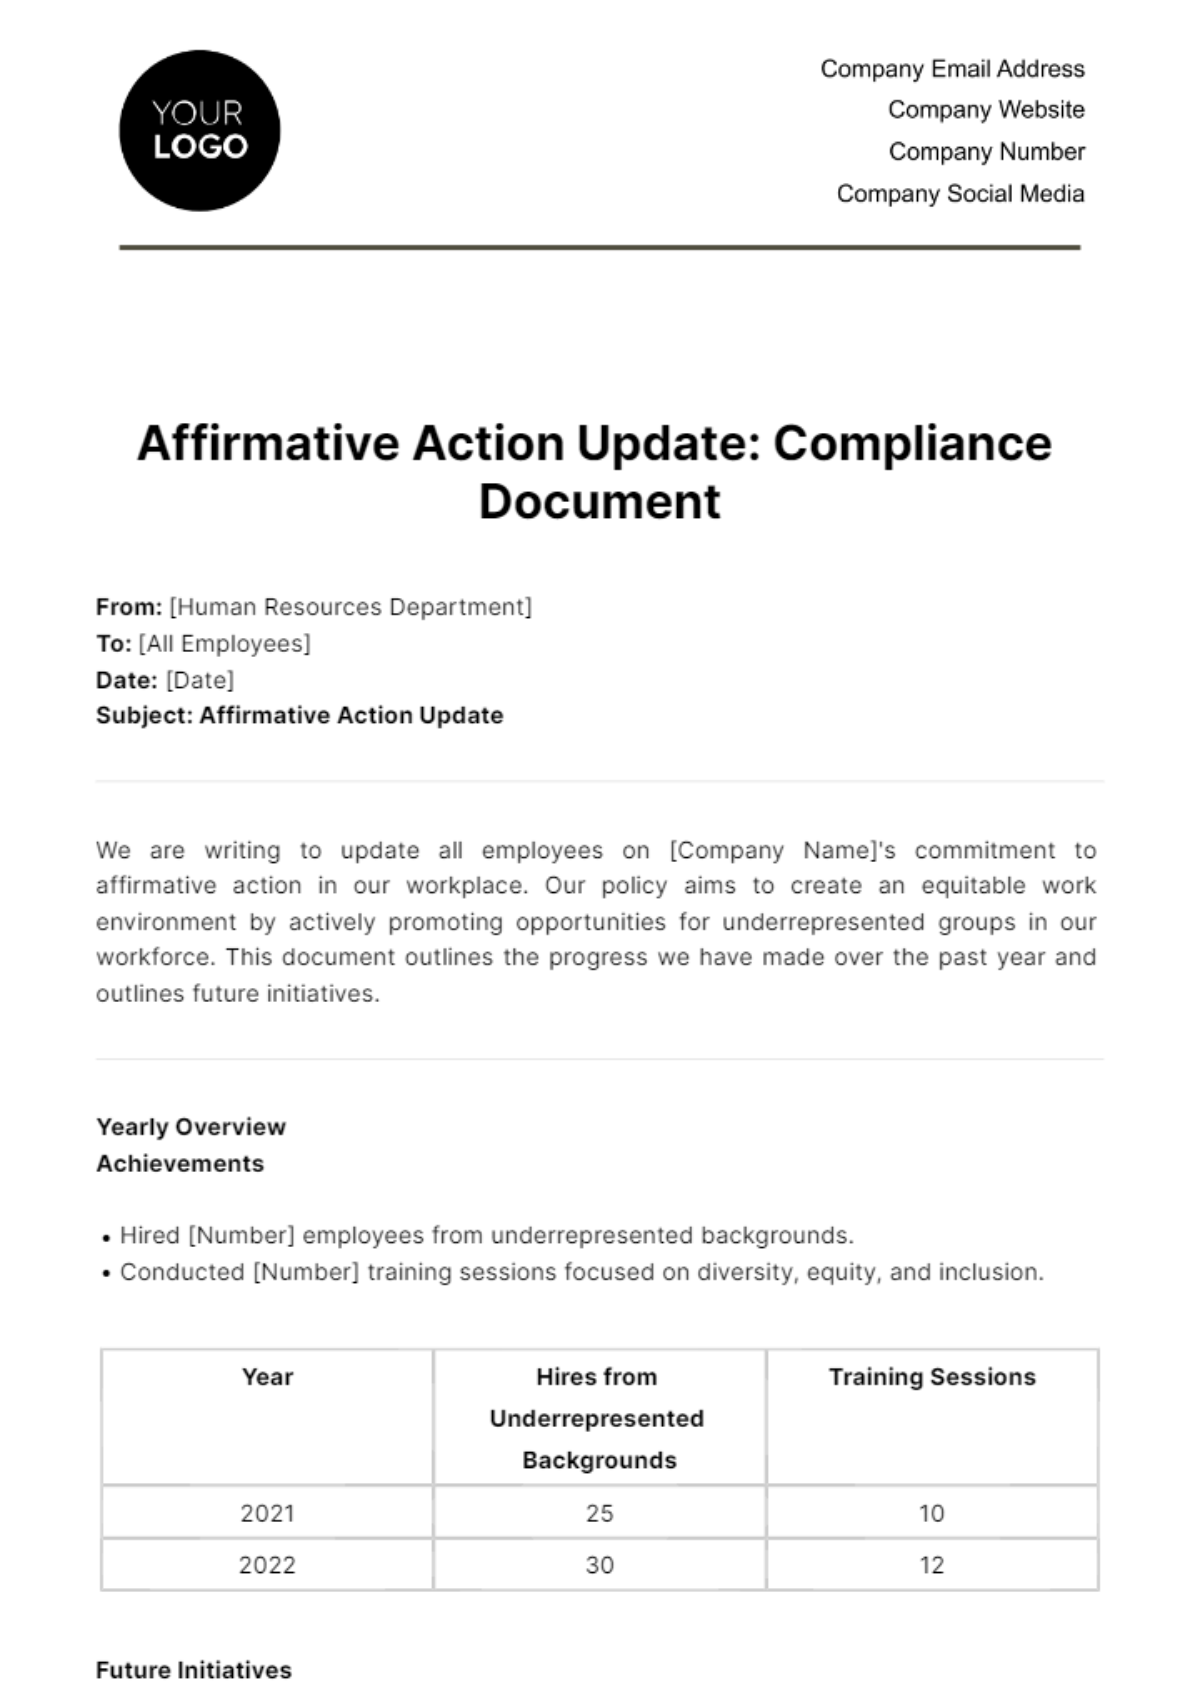 Affirmative Action Update HR Template